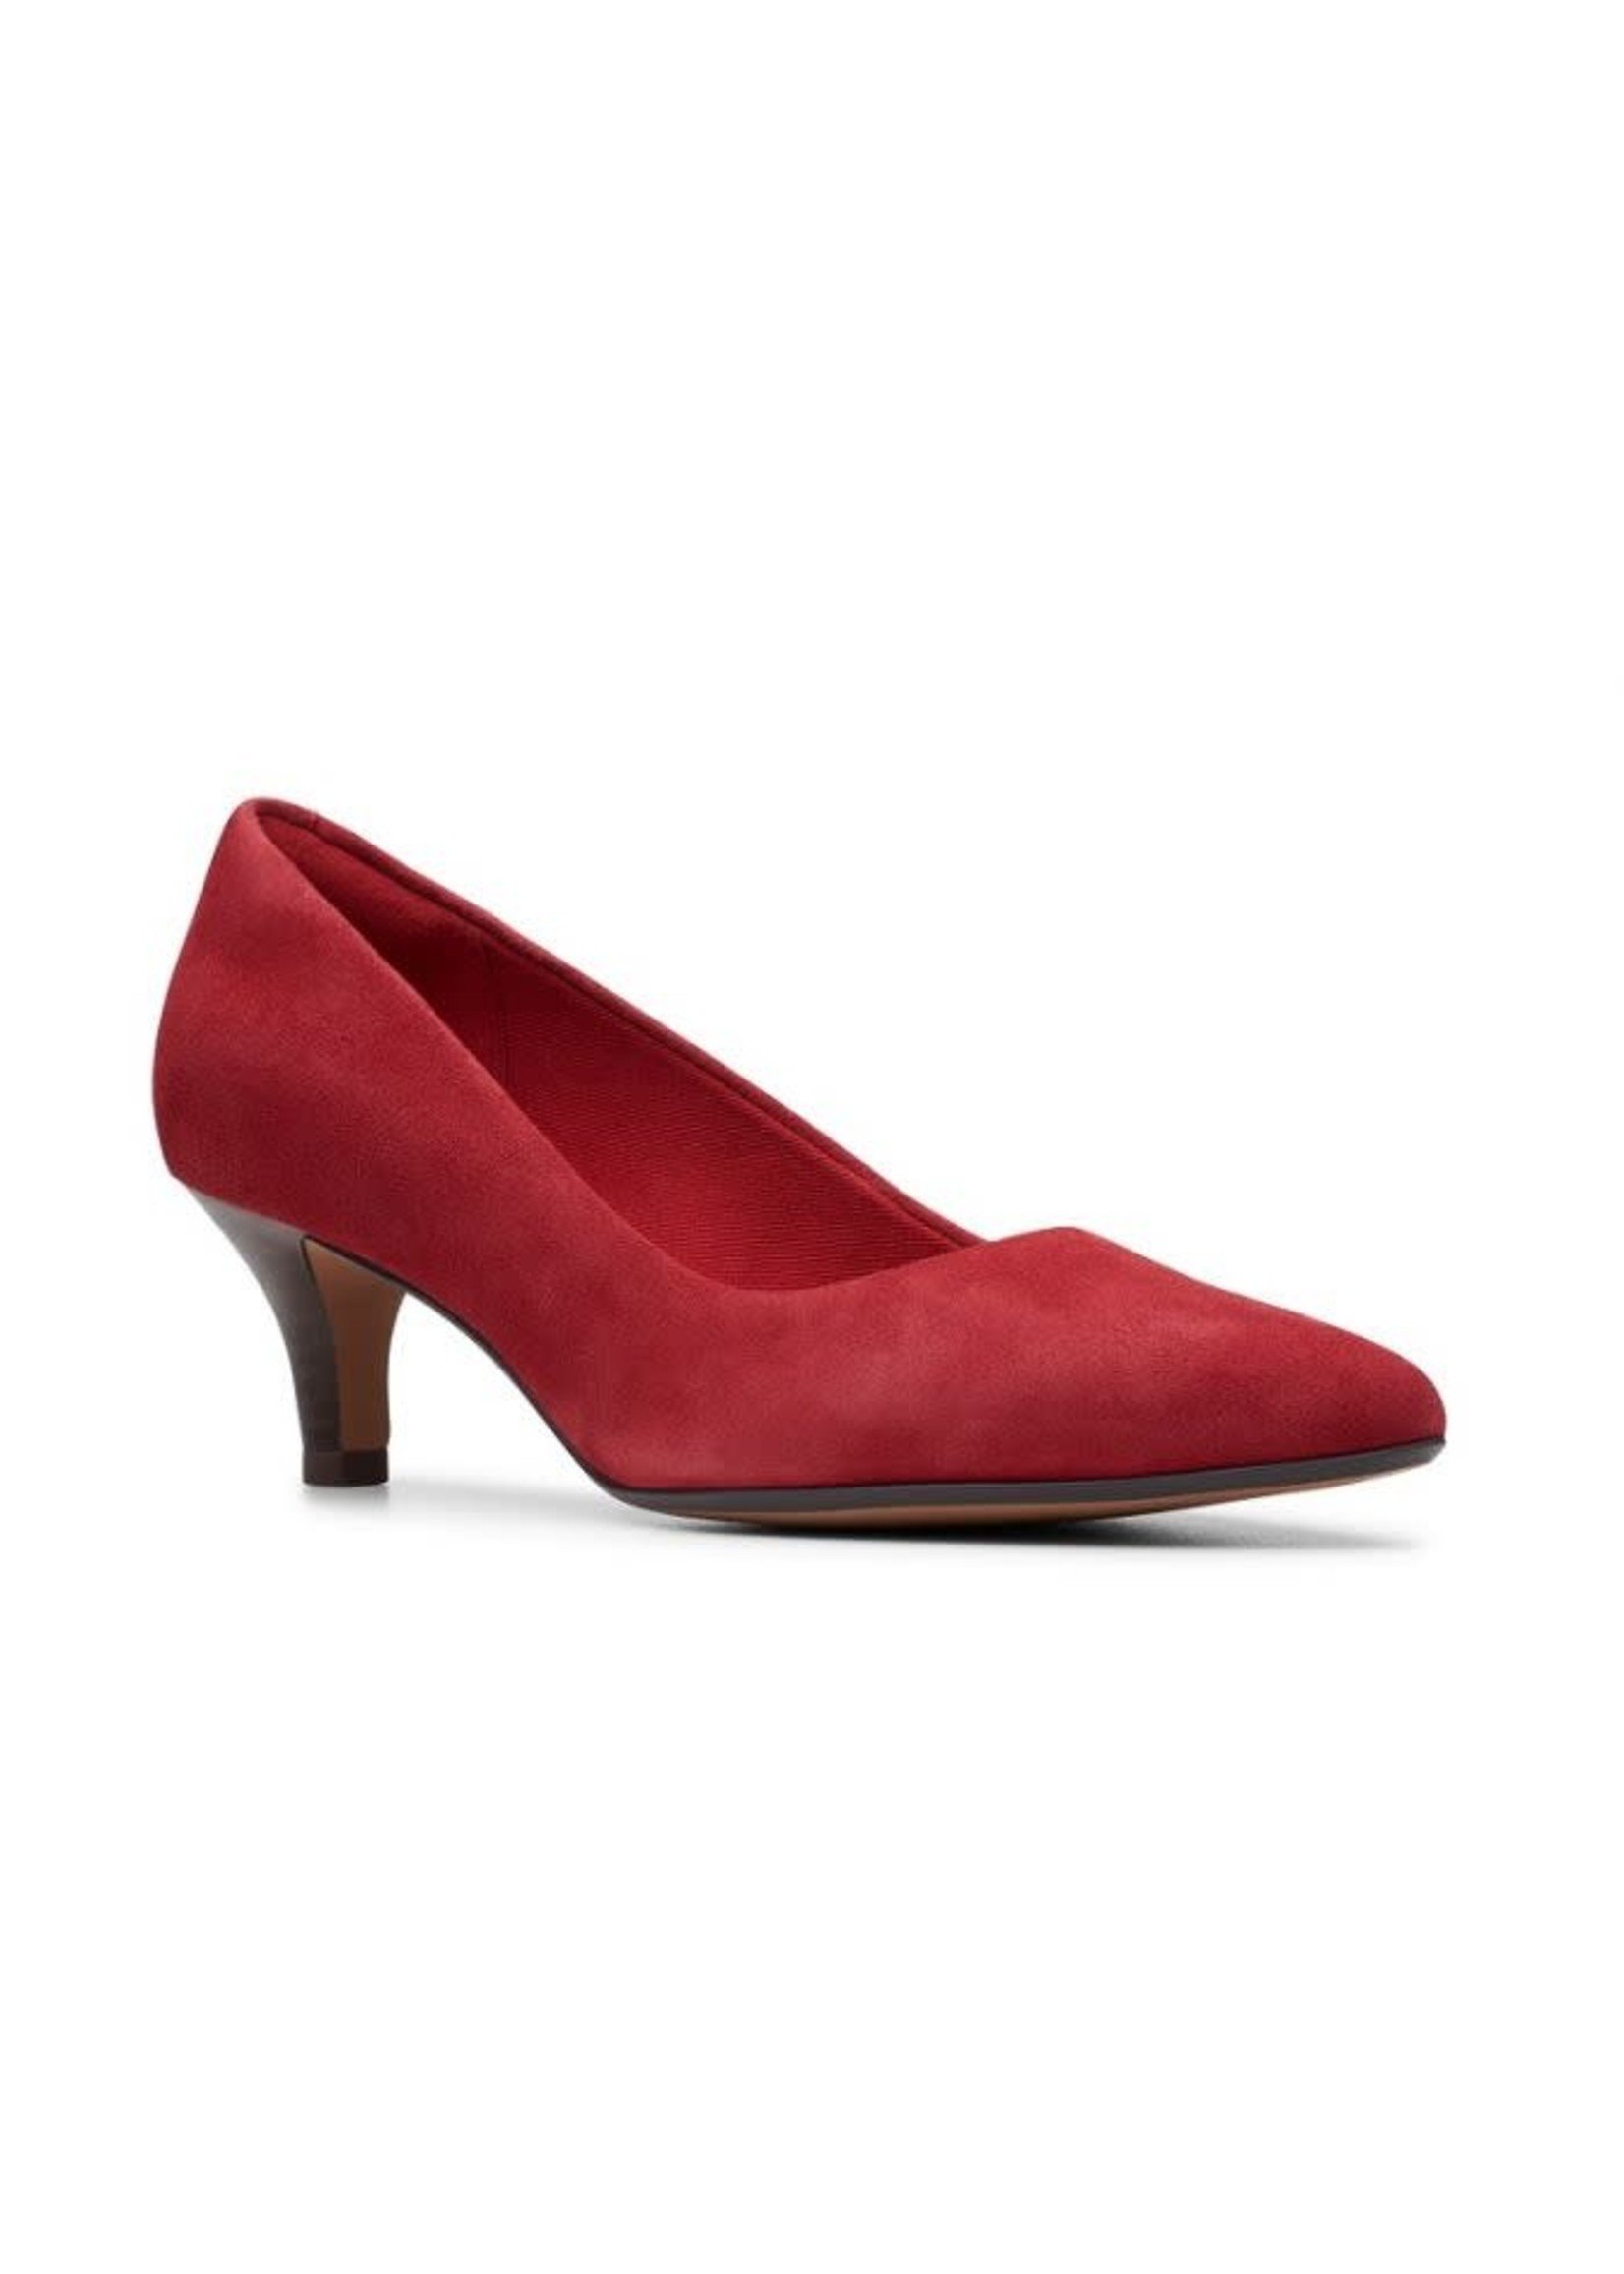 clarks shoes red pumps